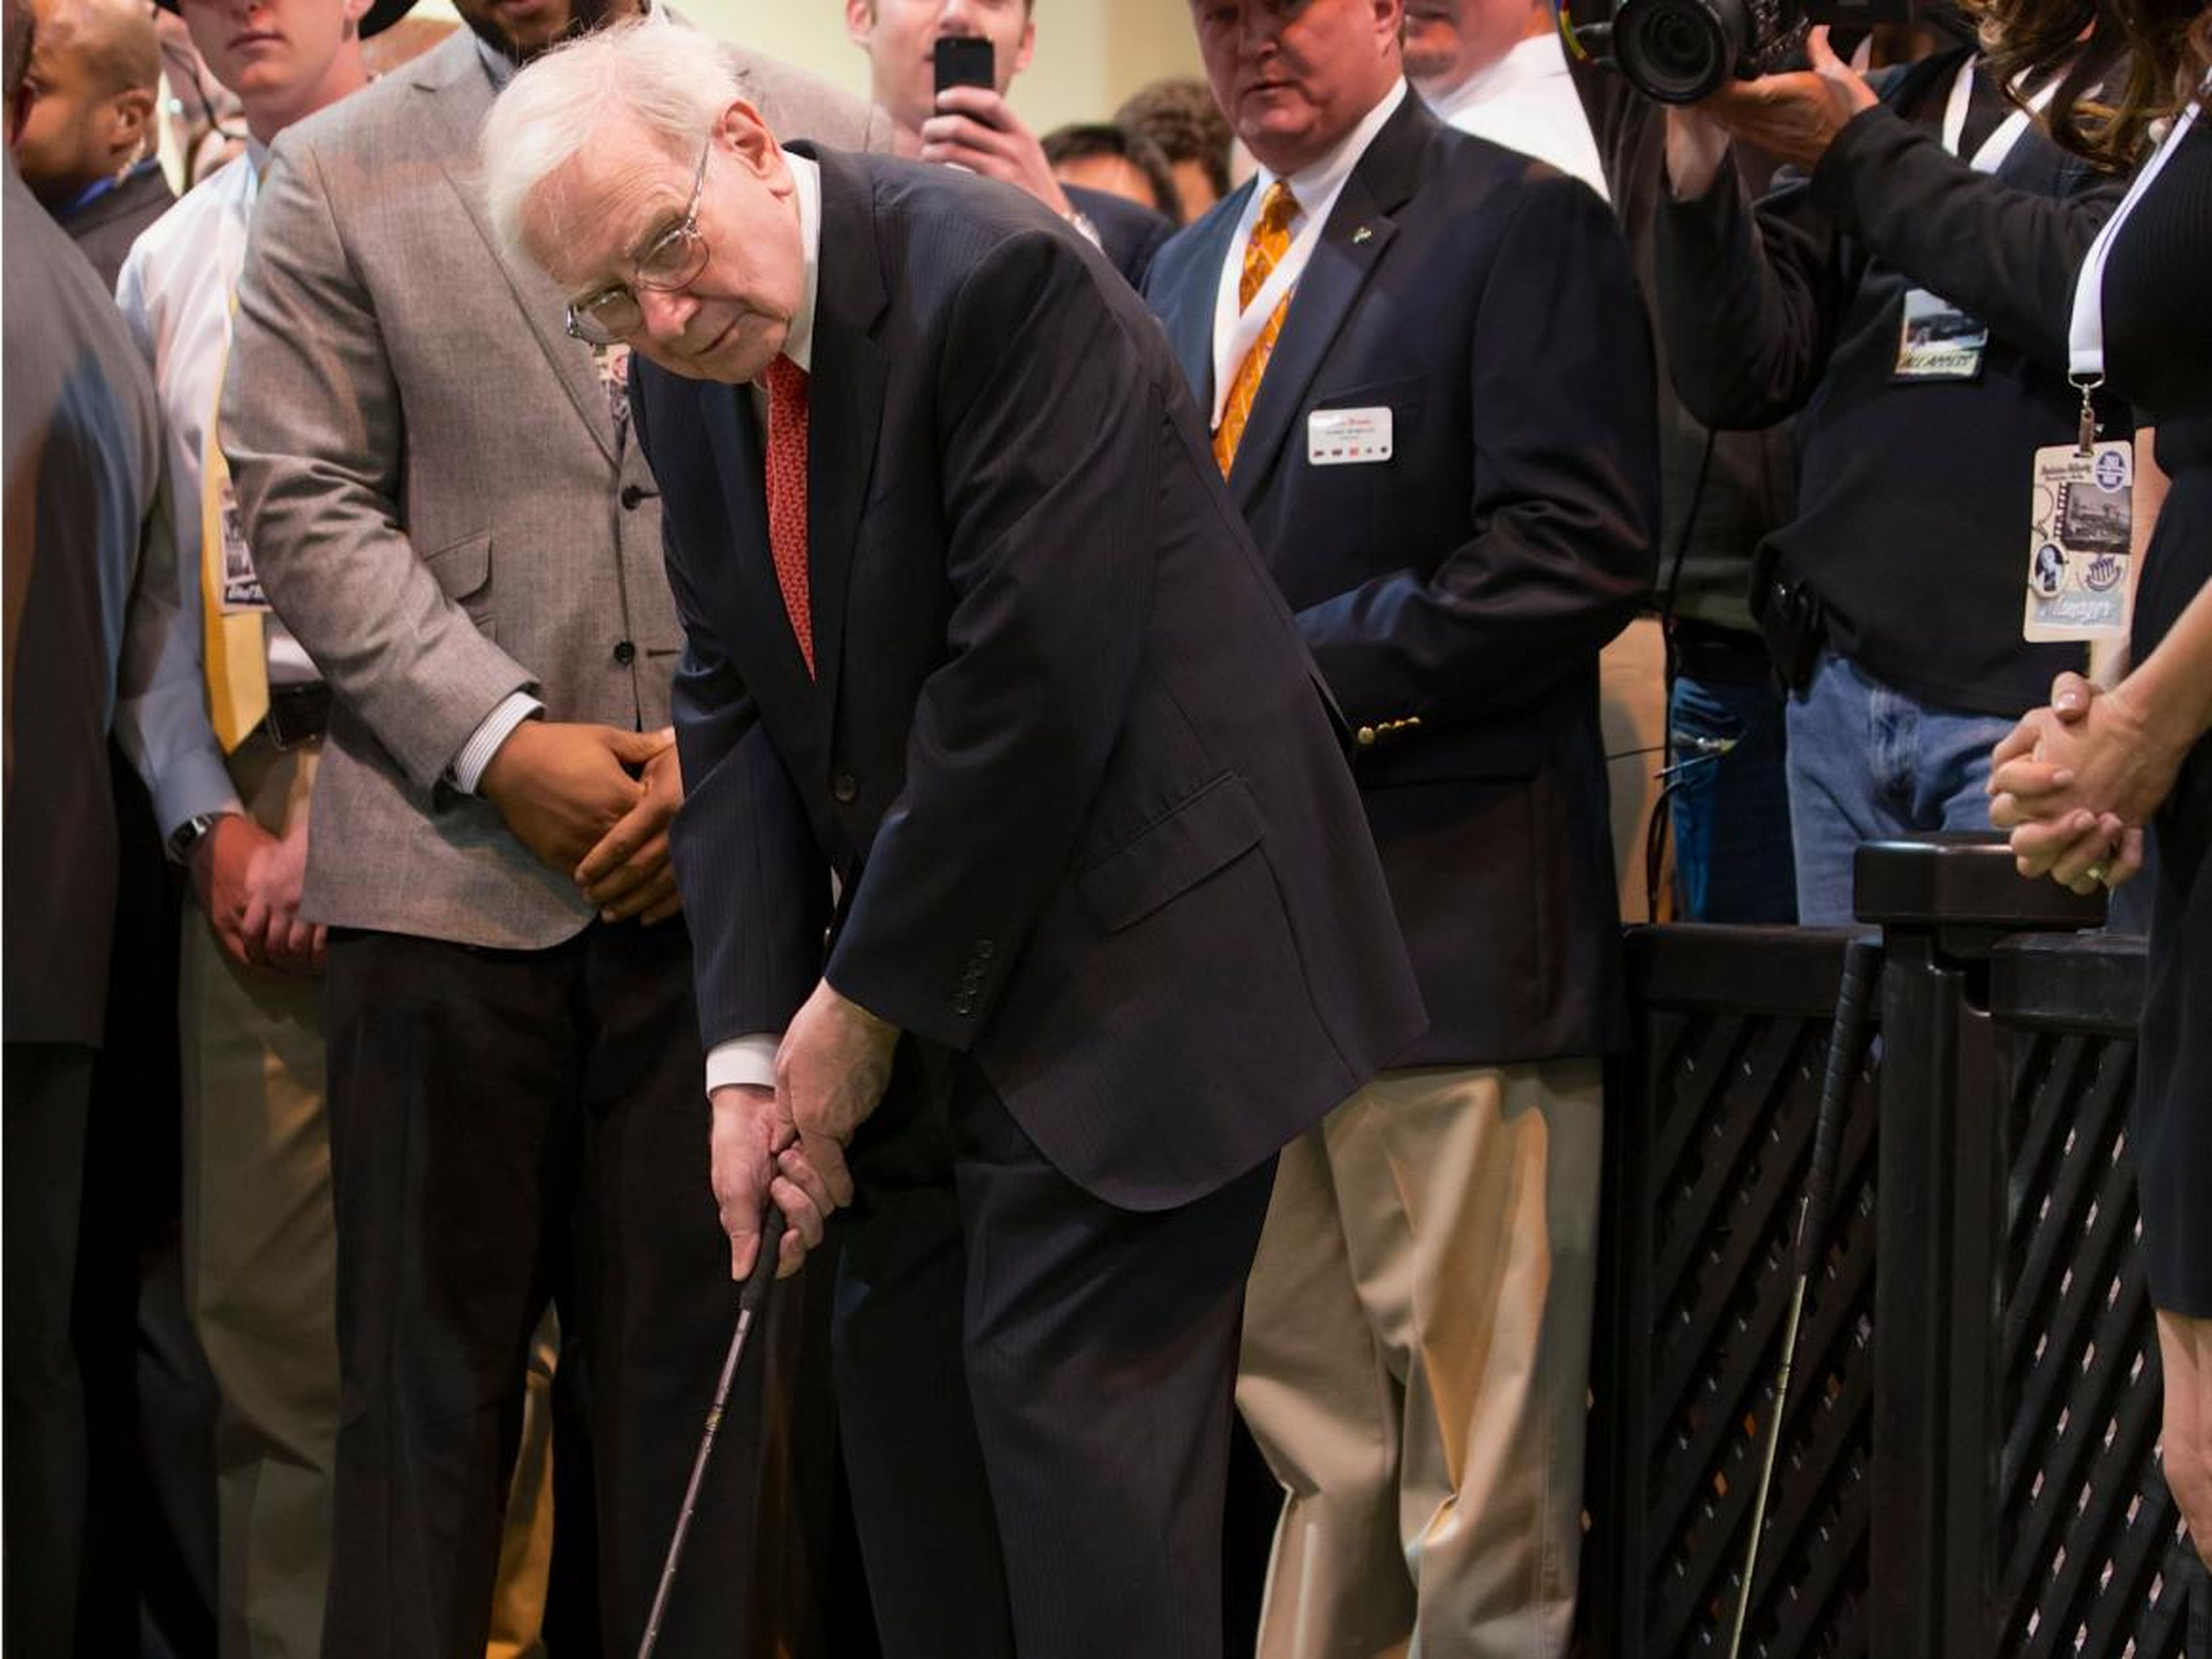 Buffett also likes to hit the green for some golf — but he doesn't spend his money on fancy golf clubs. "I'm a member of every golf club that I want to be a member of […] I'd rather play golf here with people I like than at the